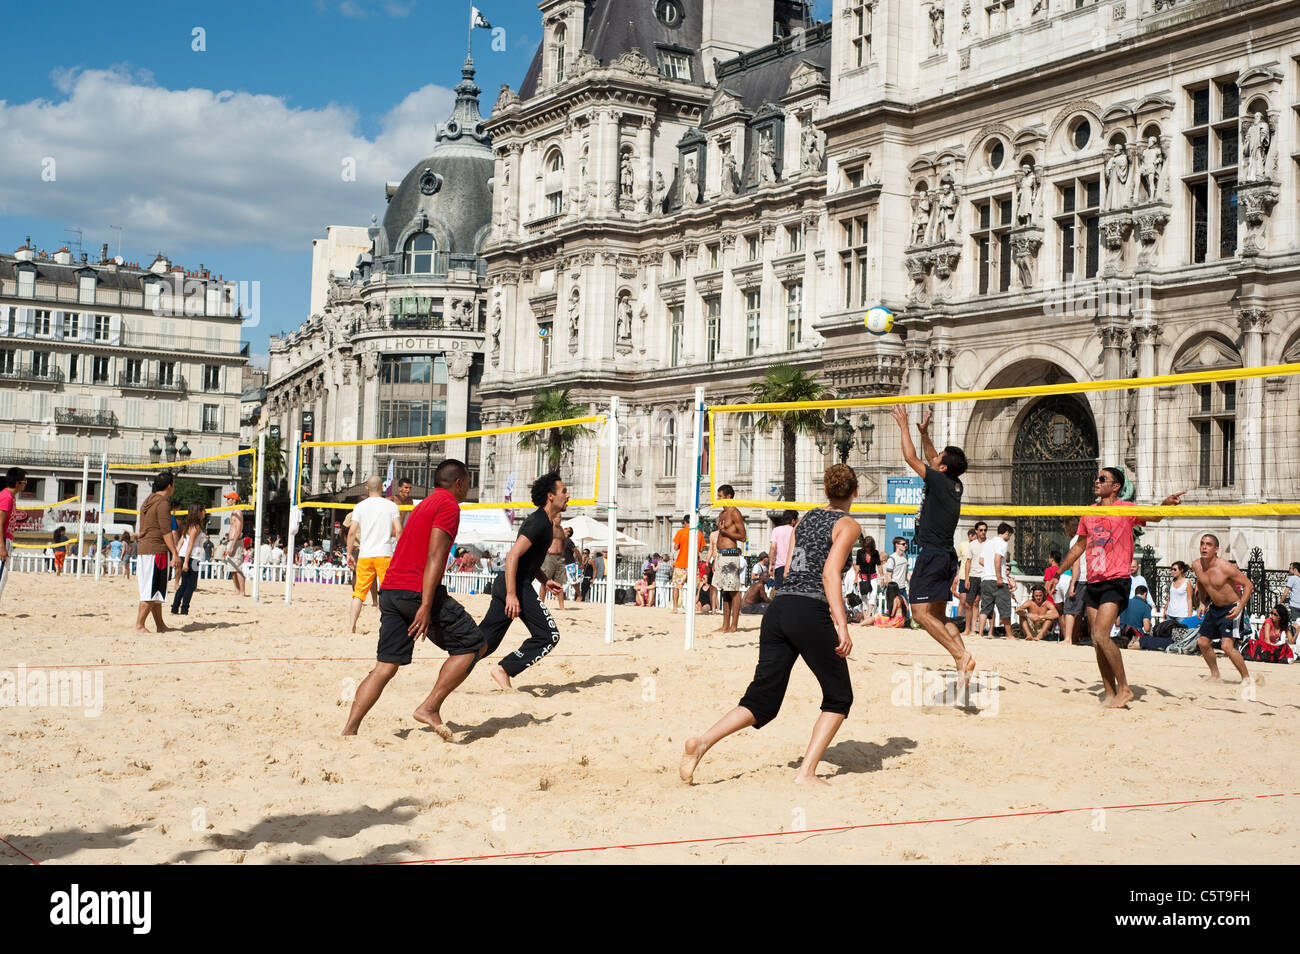 People playing beach volleyball on an artificial field in  front of City Hall during the Paris Plage event, Paris, France. Stock Photo